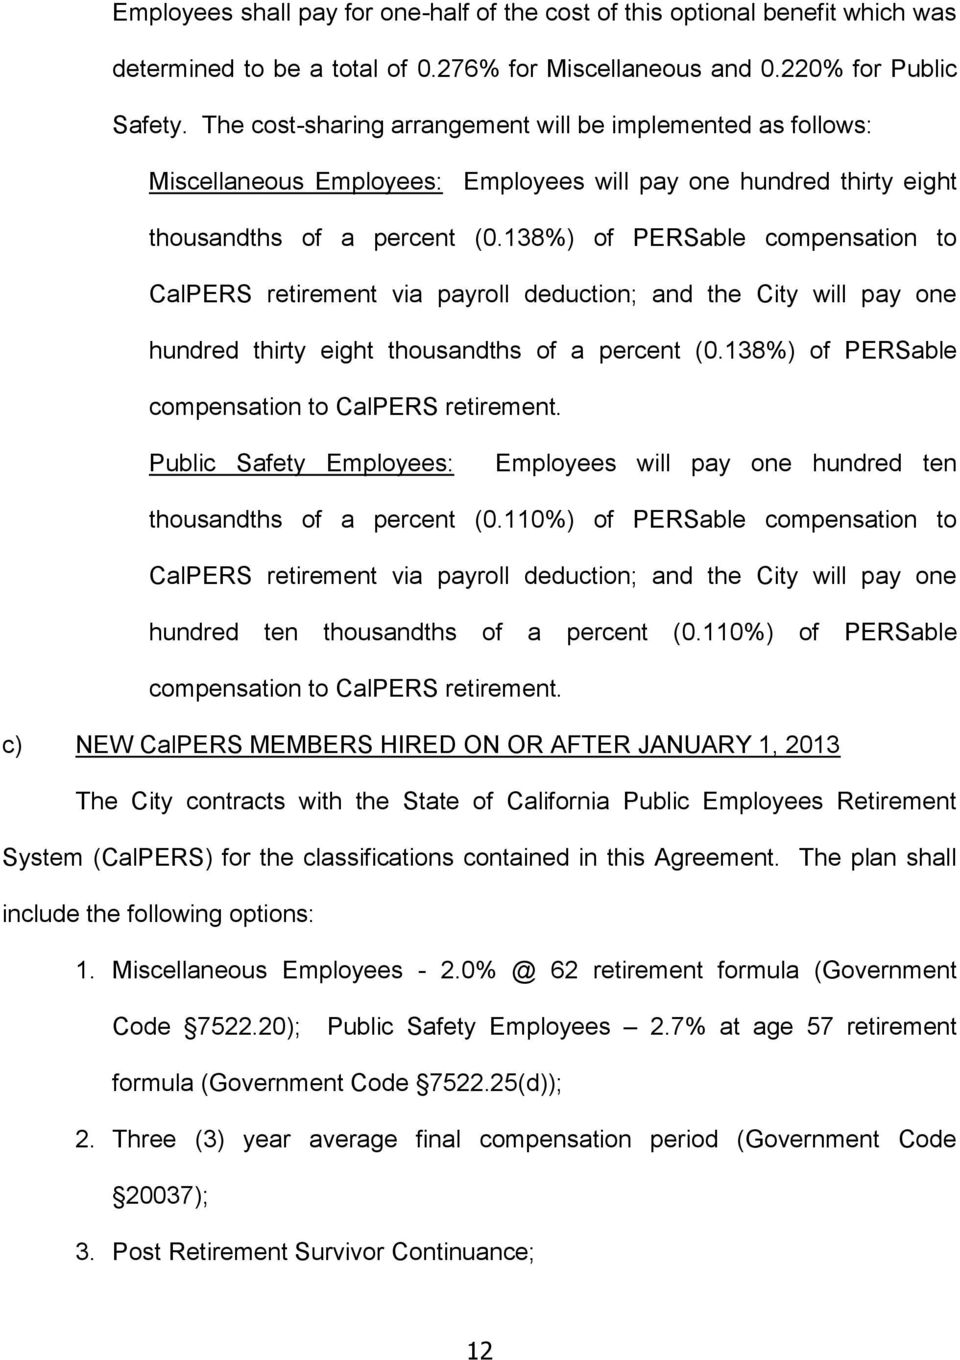 138%) of PERSable compensation to CalPERS retirement via payroll deduction; and the City will pay one hundred thirty eight thousandths of a percent (0.